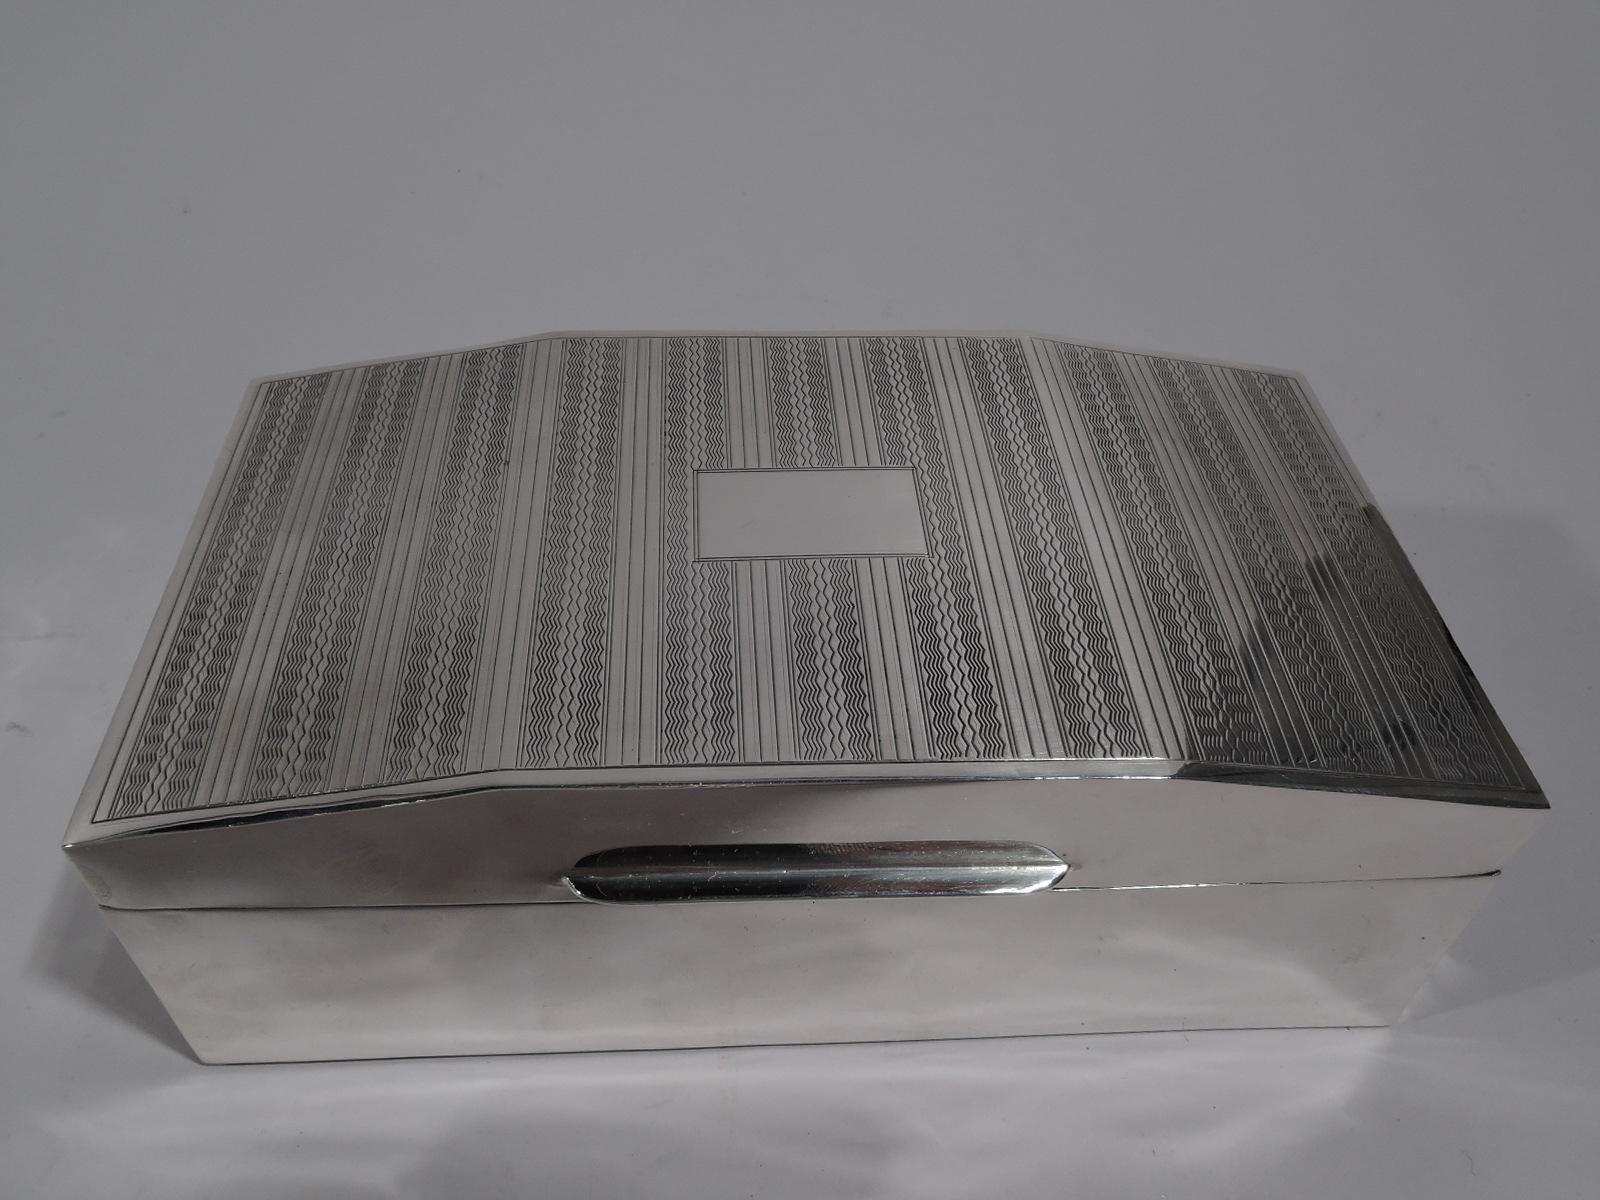 Smart English Art Deco sterling silver box, 1931. Rectangular with straight sides. Cover hinged, tabbed, and gentle faceted. Cover top has alternating engine-turned wavy and lined bands, as well as central rectangular frame (vacant). Box and cover